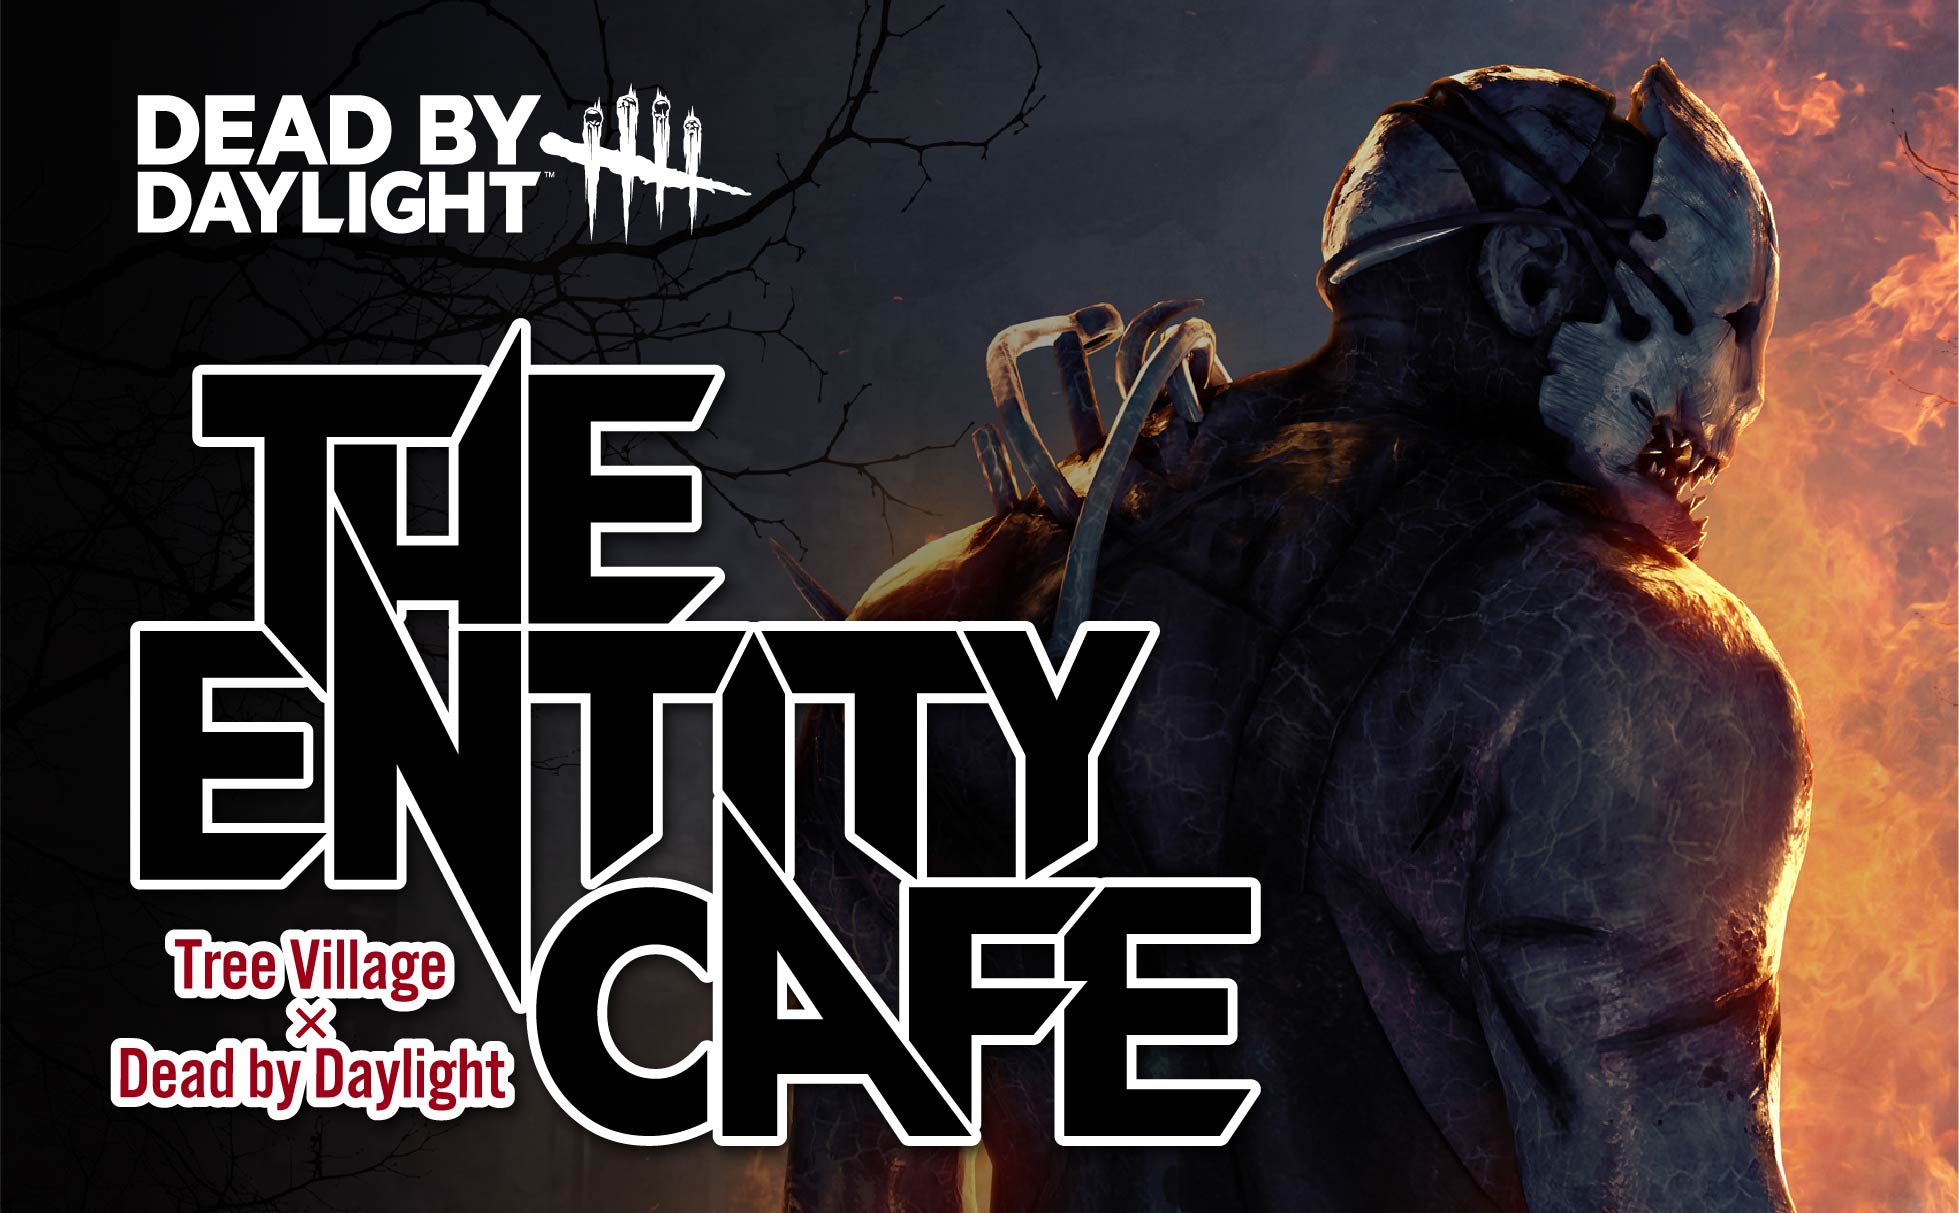 Dead By Daylight The Entity Cafe 東京ソラマチ R ツリービレッジ